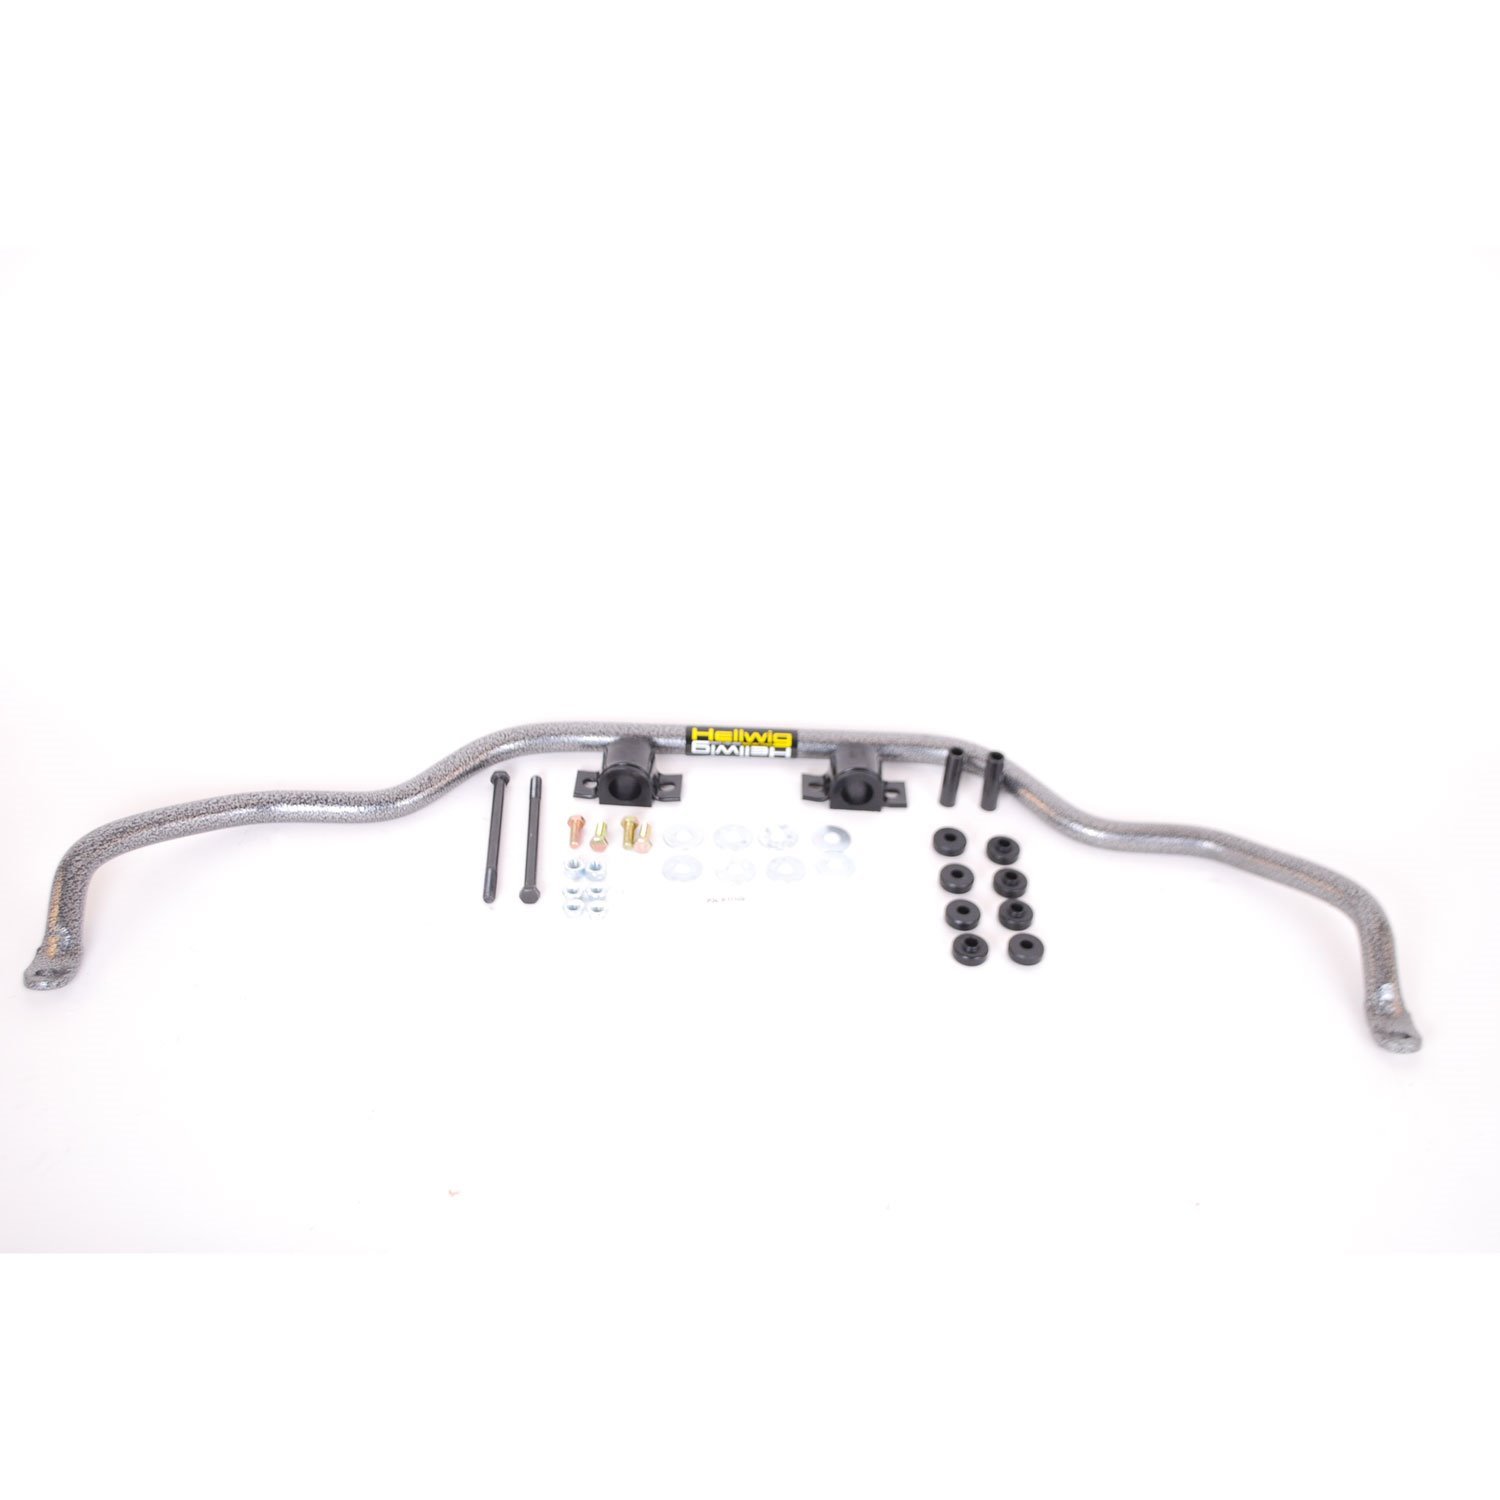 Front Sway Bar 1971-73 Ford Mustang and Mercury Cougar